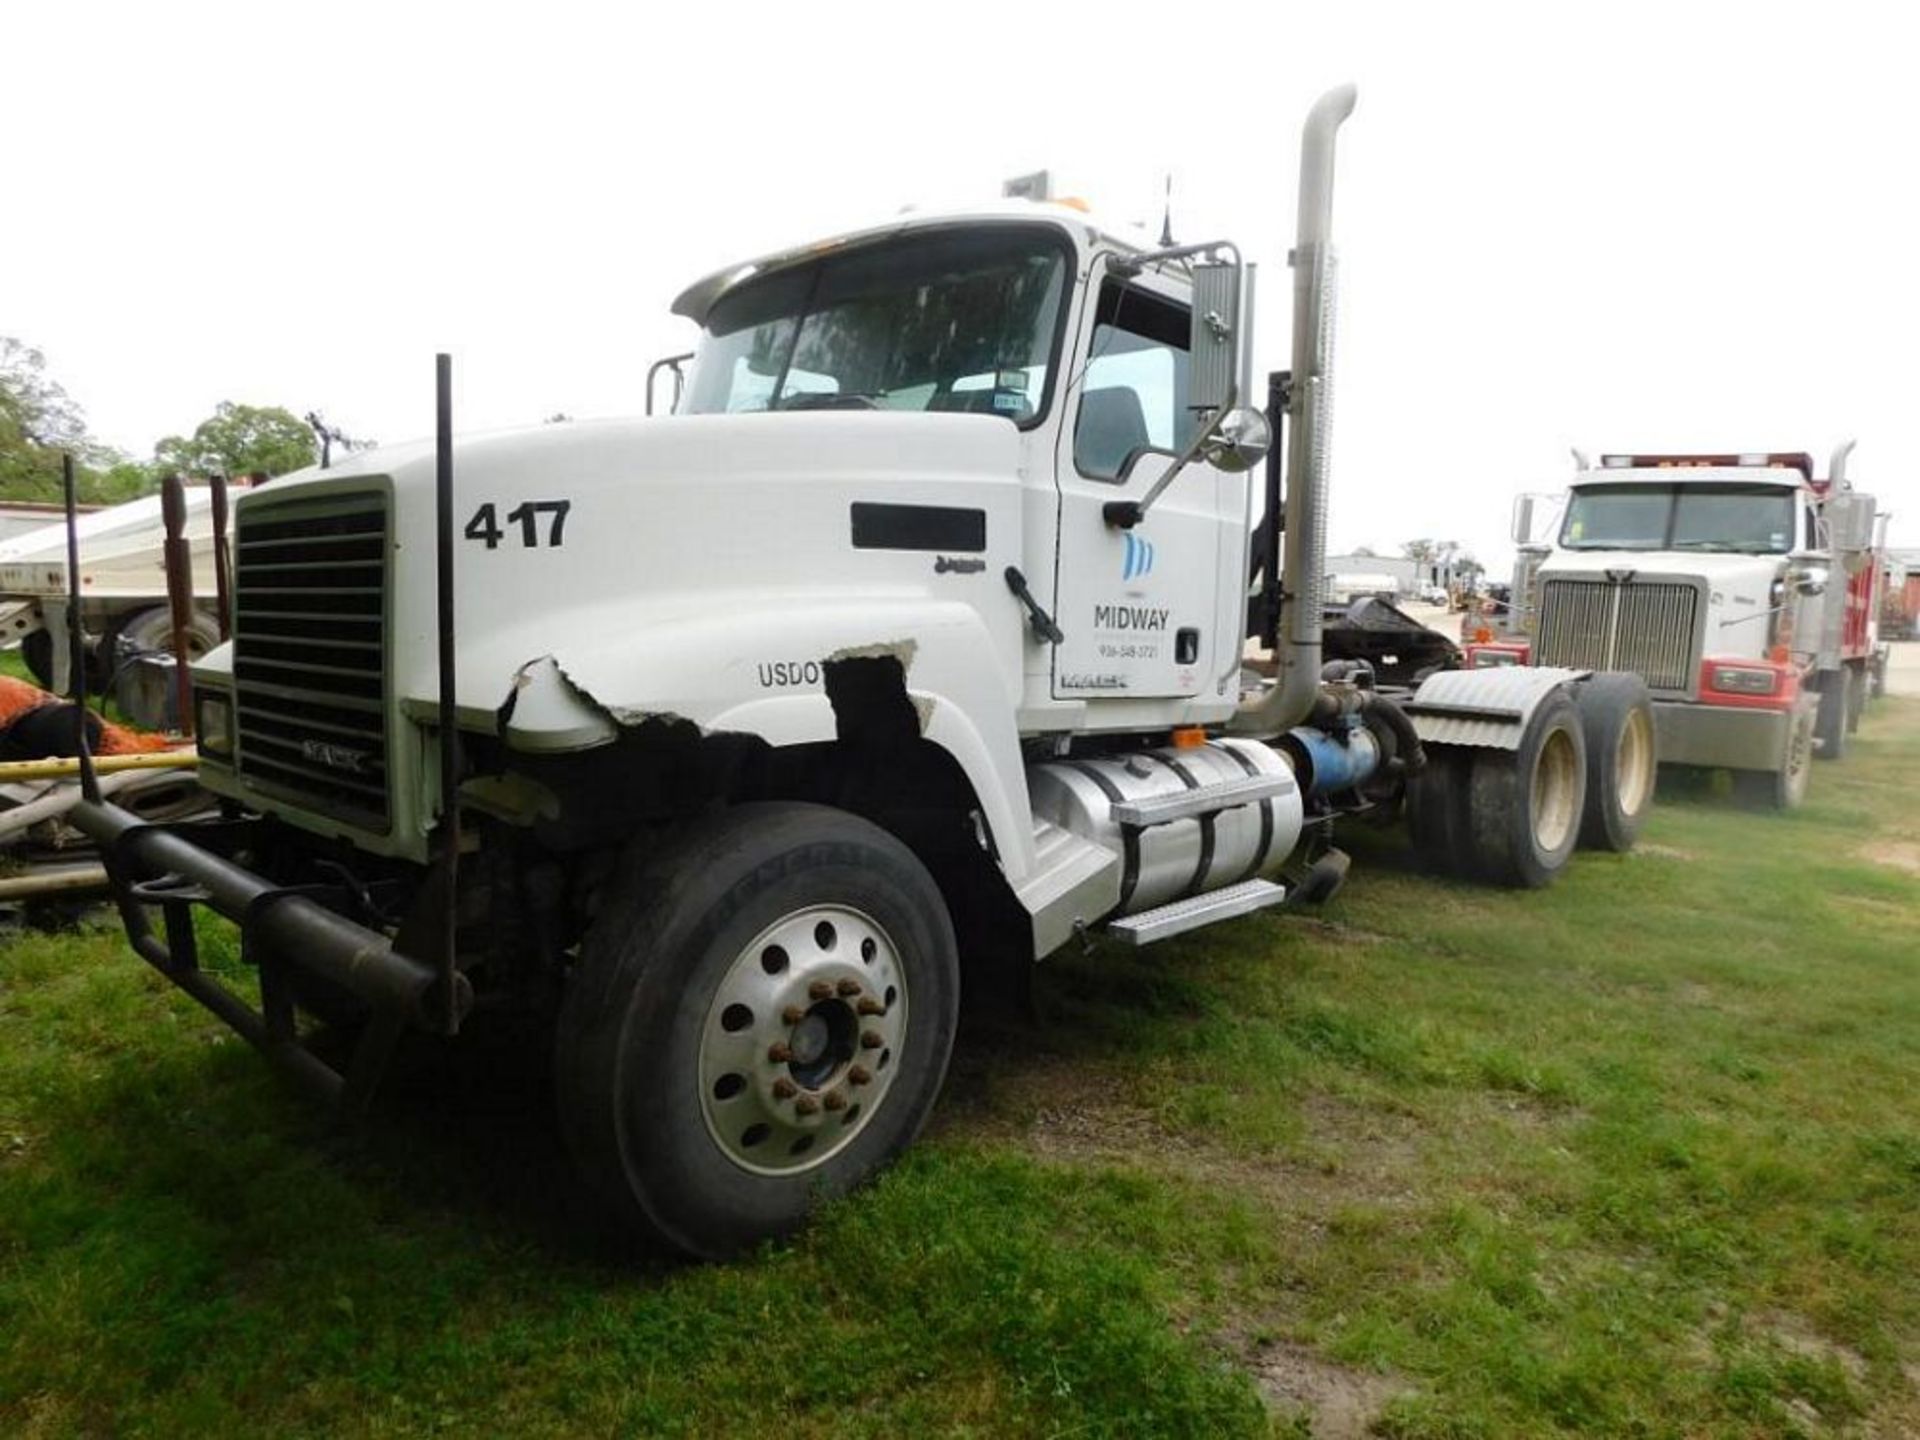 2010 Mack CHU613 Day Cab Truck Tractor, VIN 1M1AN09Y7ZN005327, MP8 338 HP Diesel Engine, 10-Speed Tr - Image 2 of 3